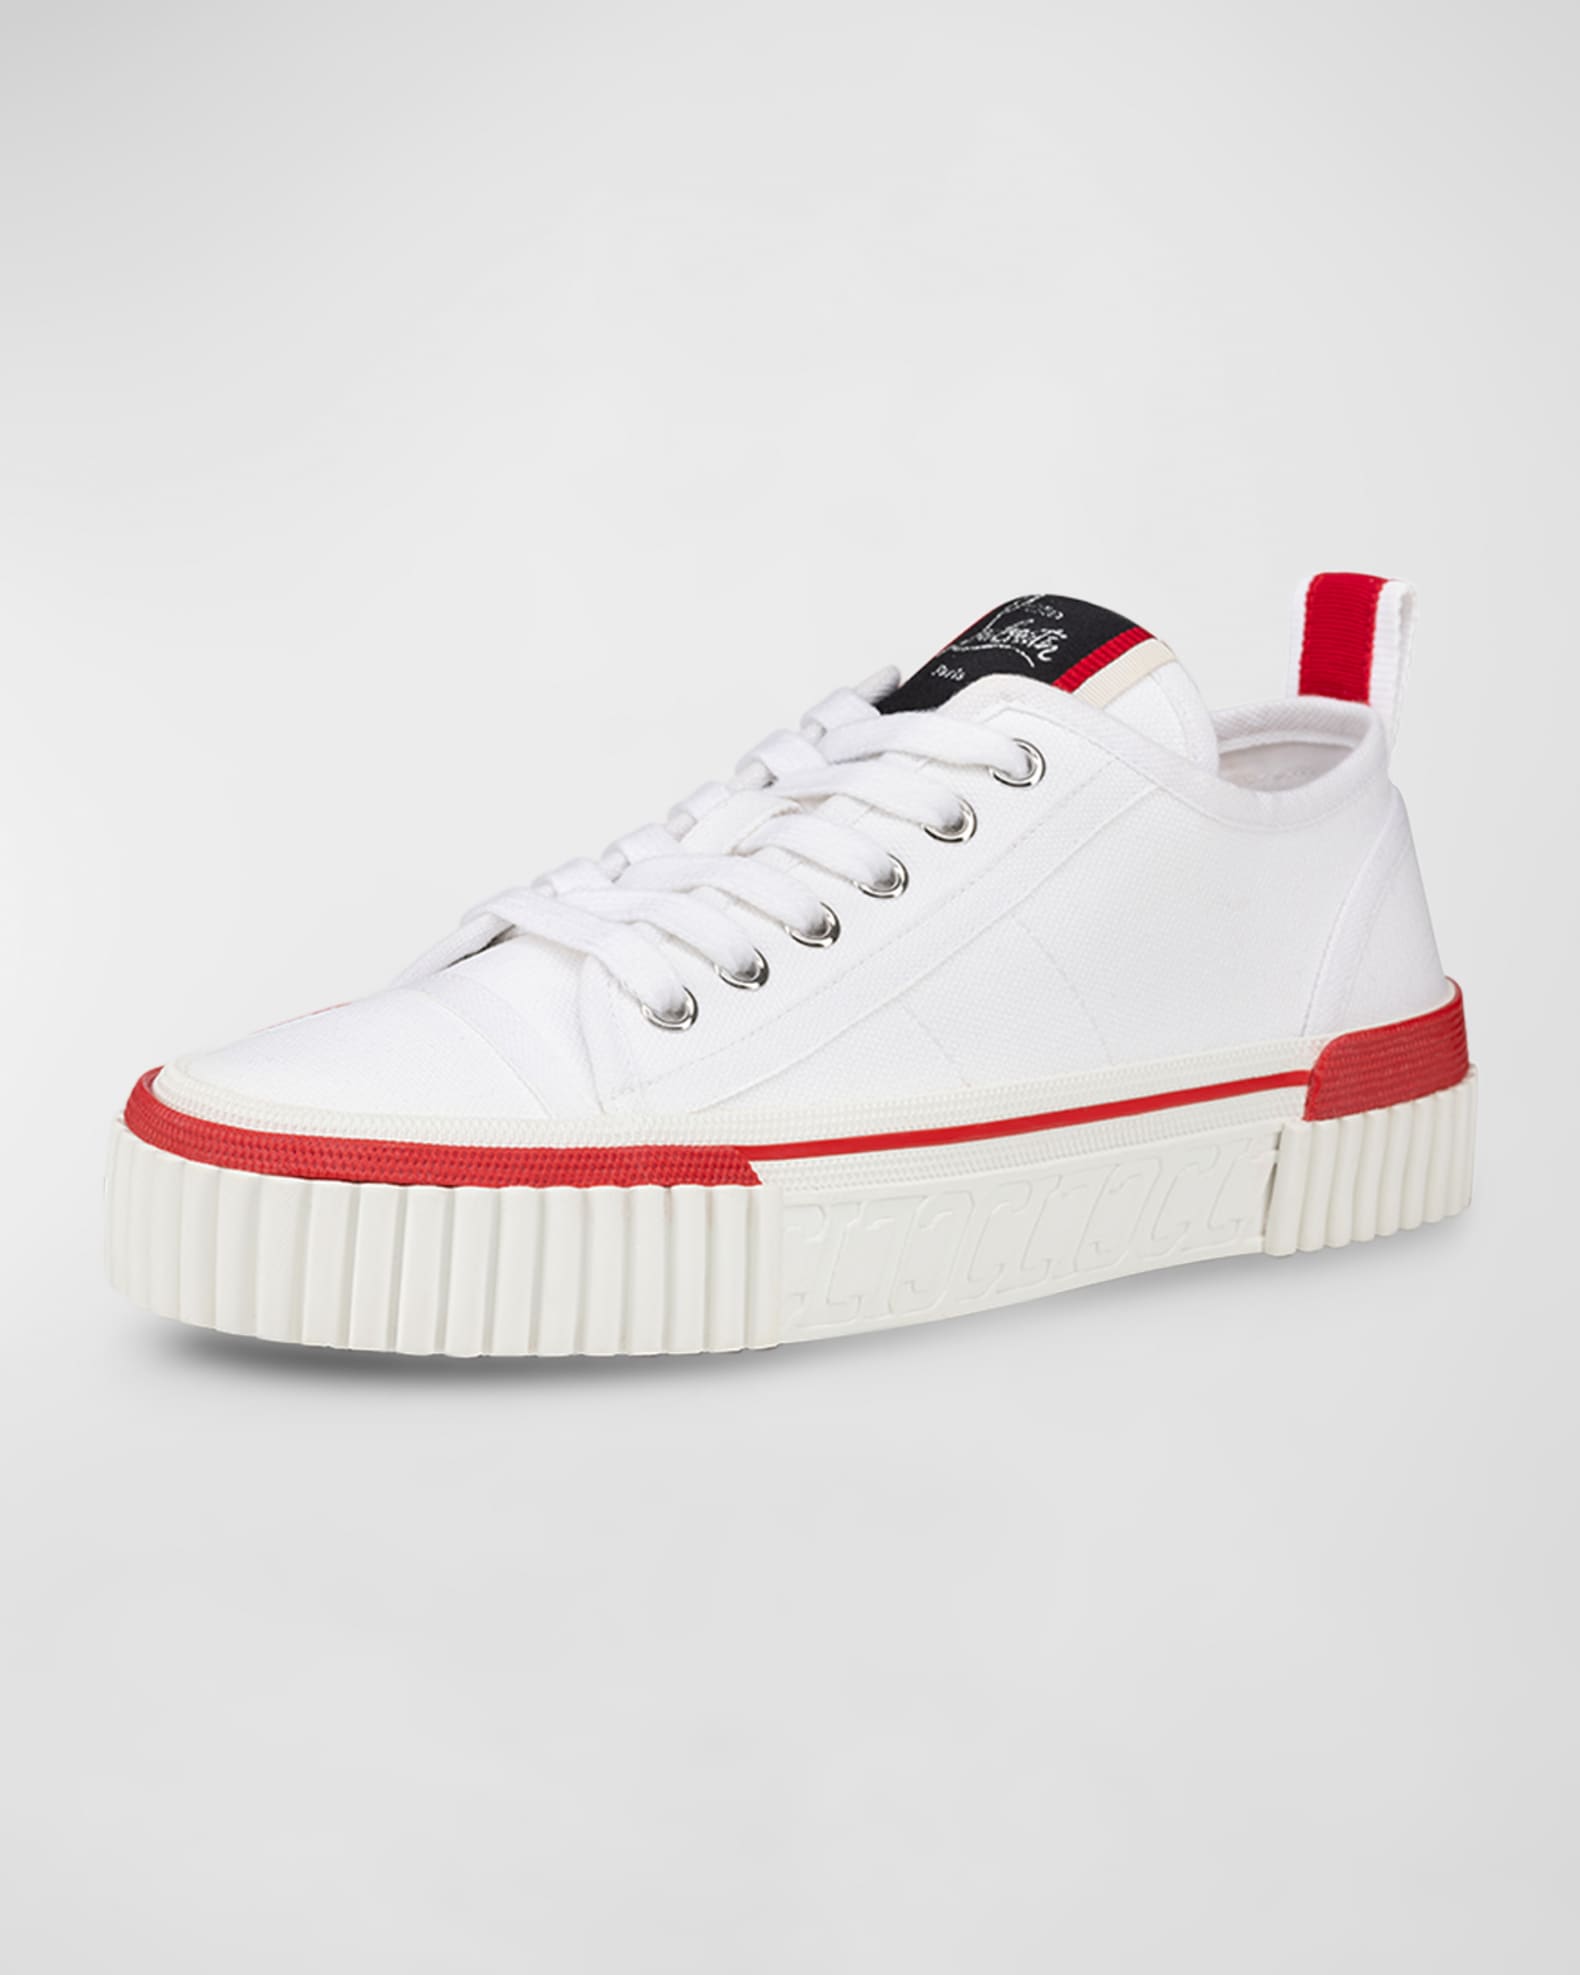 Christian Louboutin Pedro Donna Canvas Red Sole Sneakers | Neiman Marcus